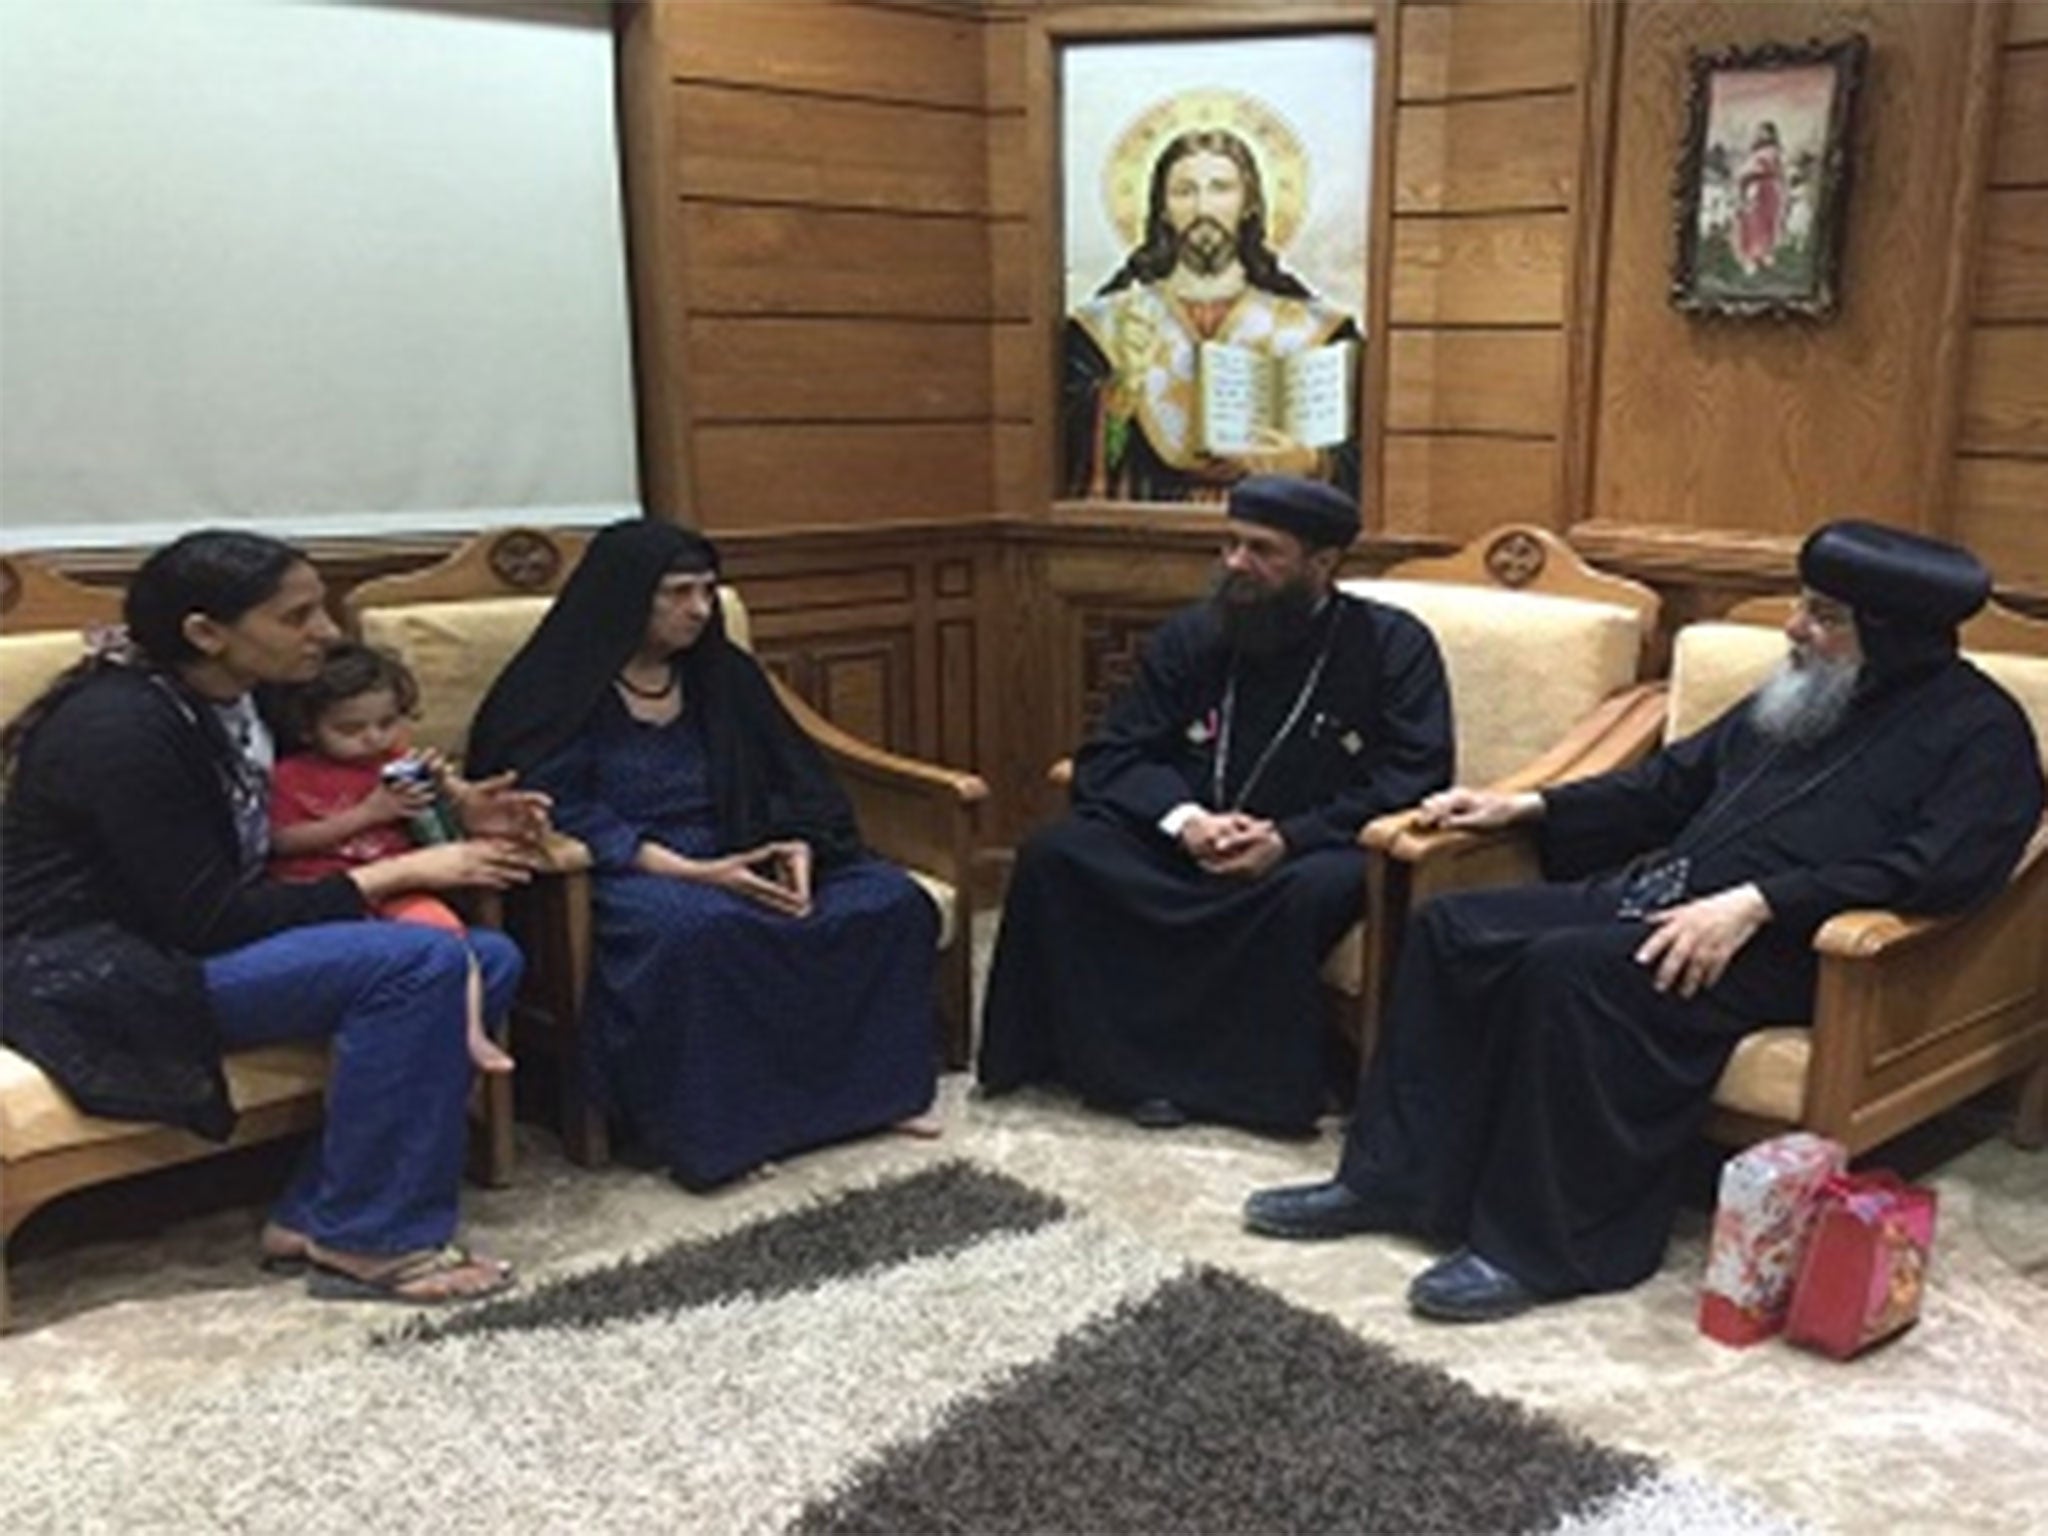 &#13;
The elderly woman meets with church leaders to discuss the mob's actions, in this image released by the Diocese of Minay and Abu Qirqas&#13;